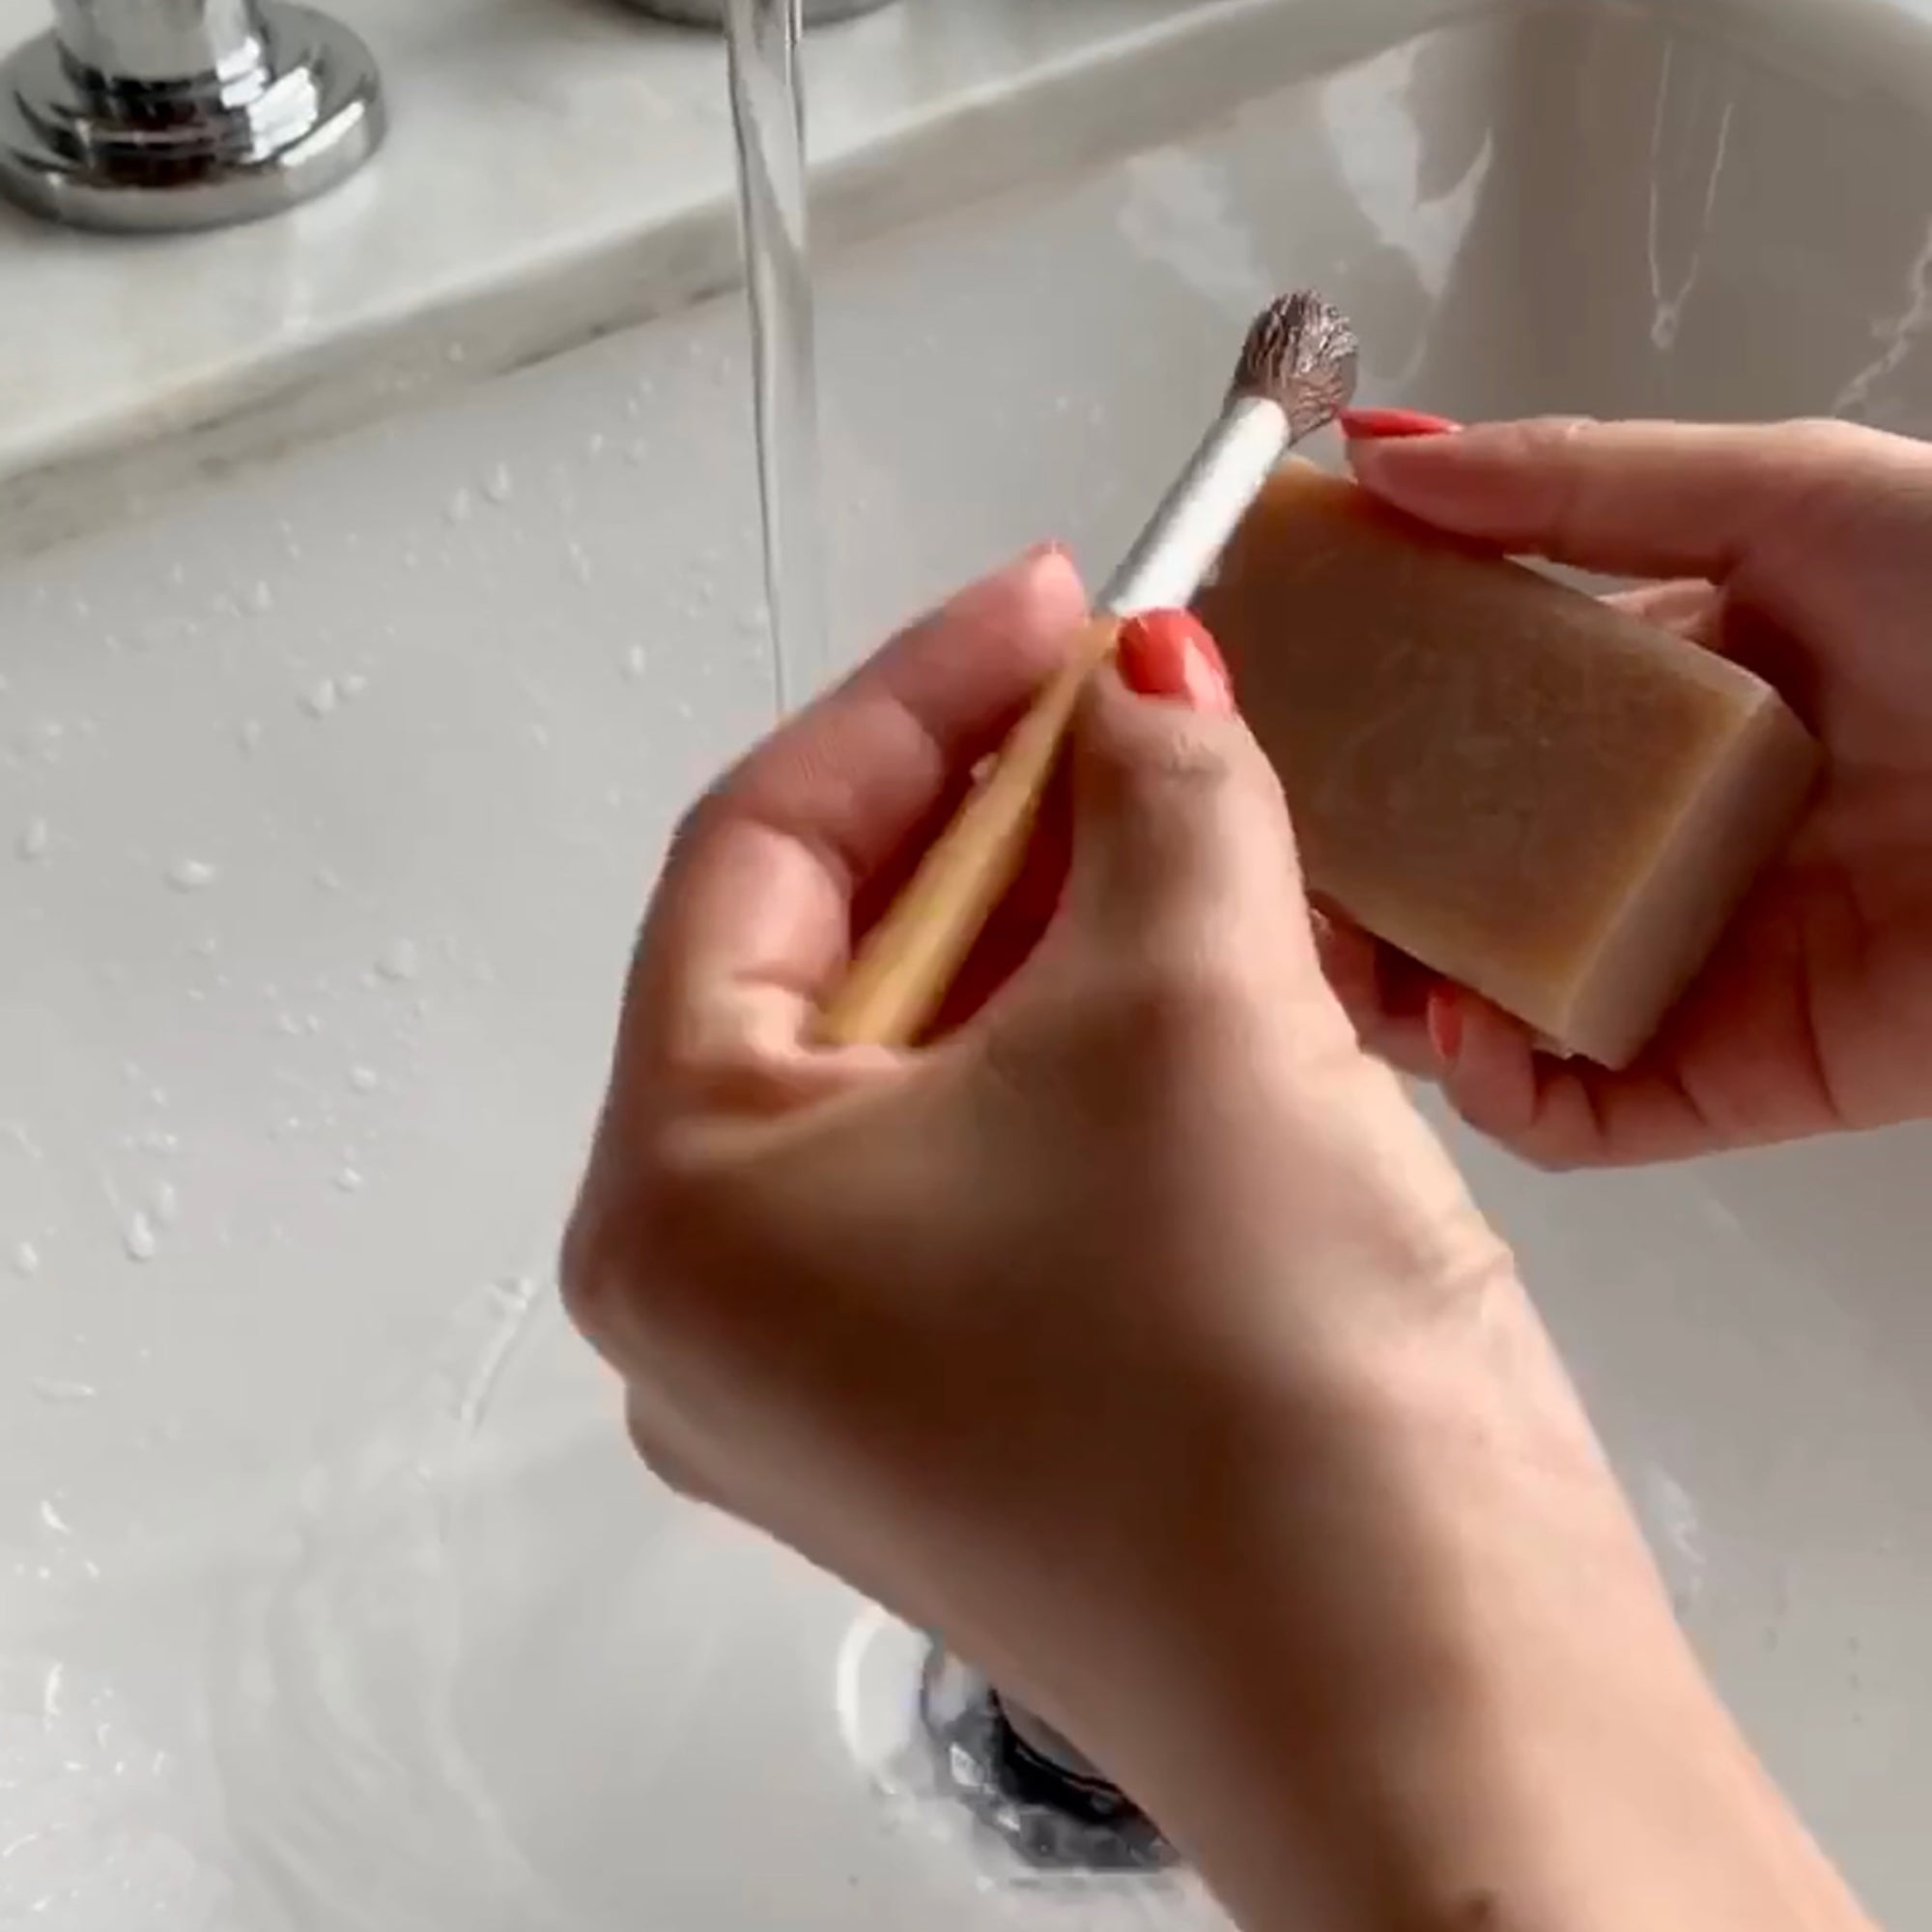 woman holding makeup brush in sink with the other hand holding a bar of soap